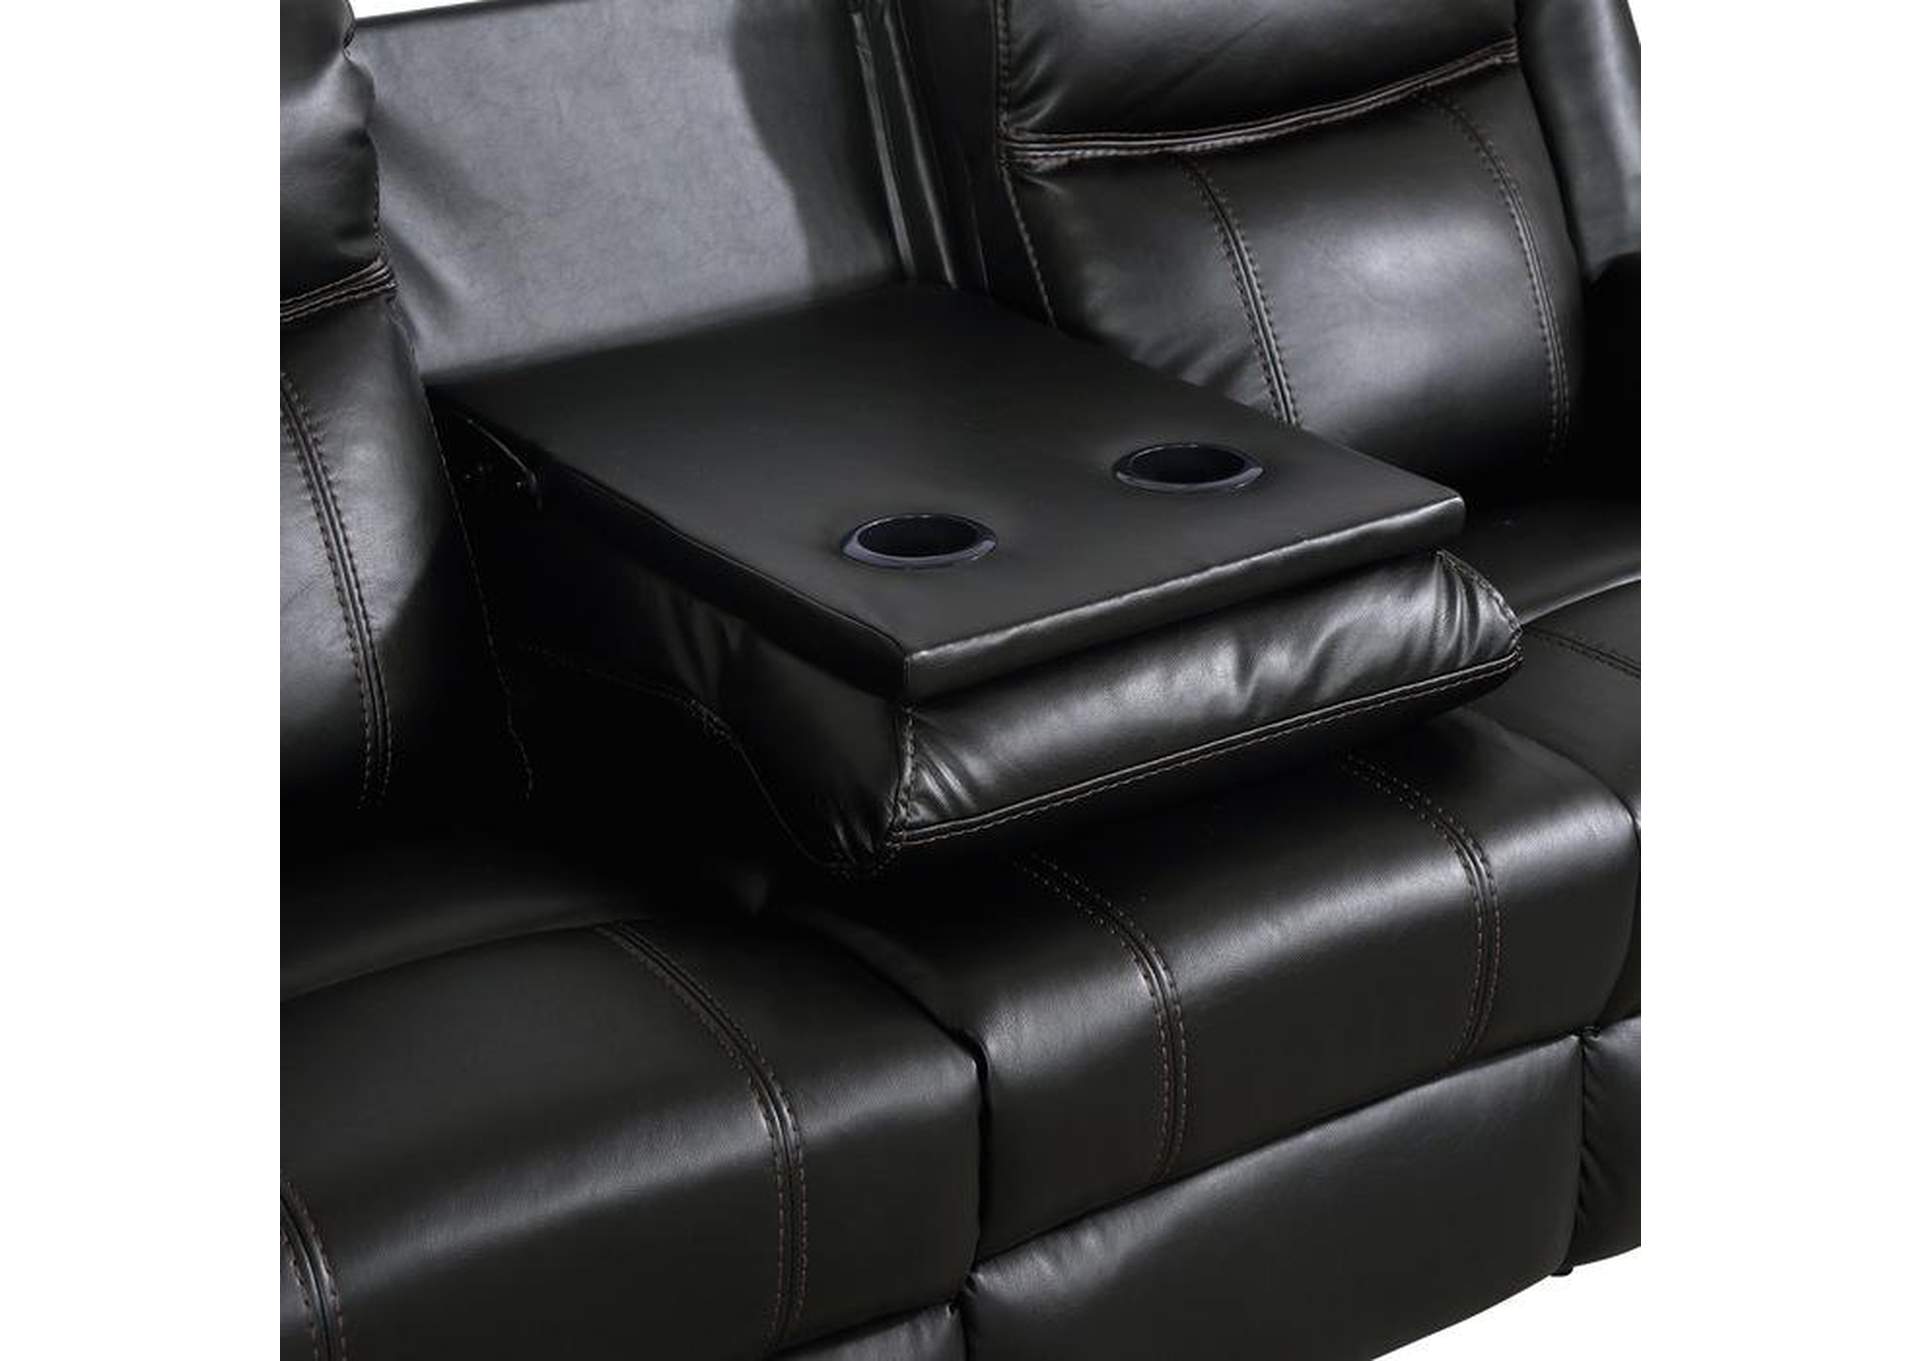 Jude Double Reclining Sofa With Center Drop-Down Cup Holders,Homelegance